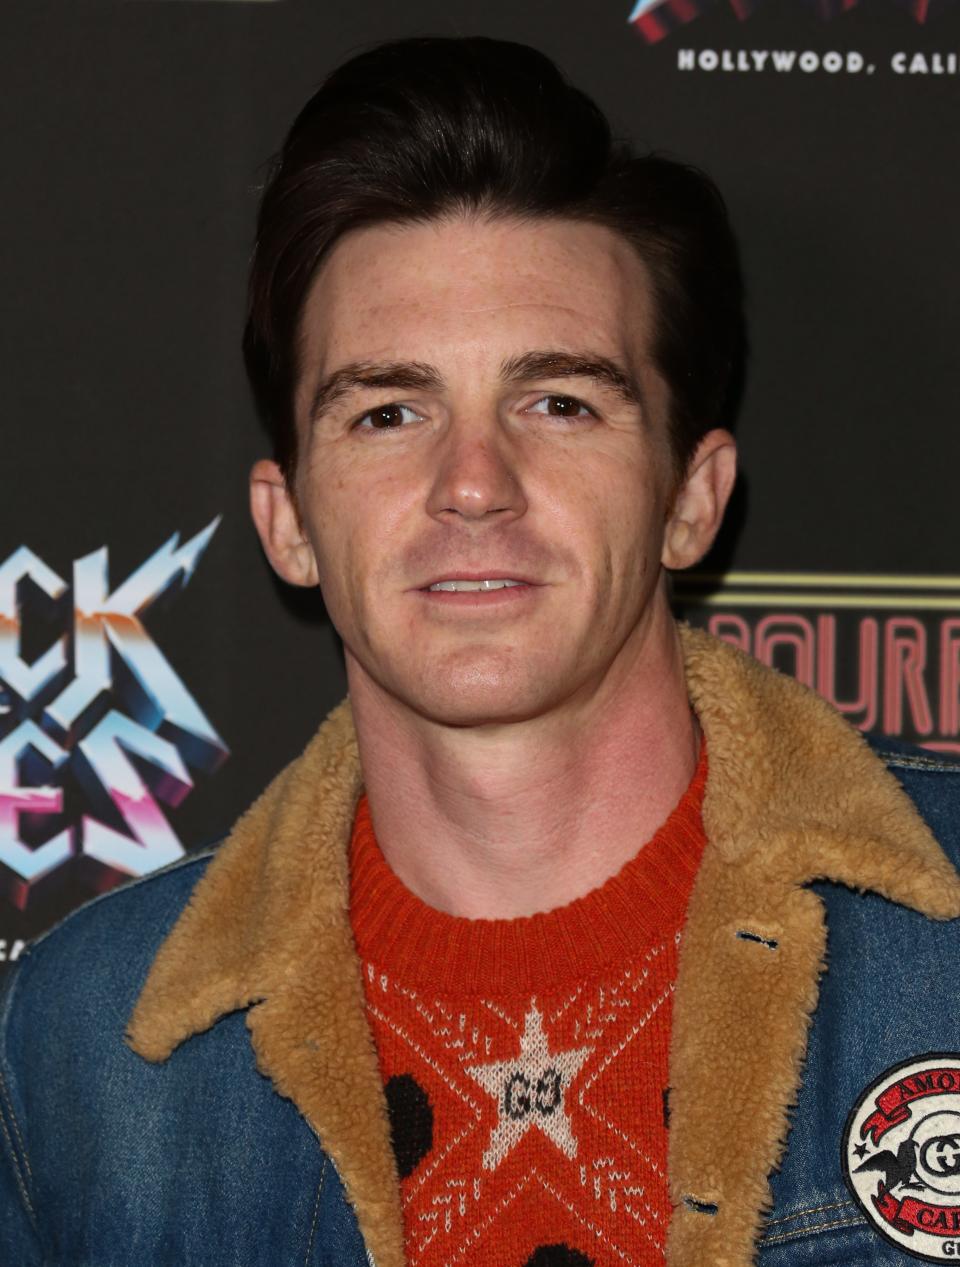 Drake Bell in a denim jacket over a star-patterned shirt, smiling at a "Rock the Vote" event